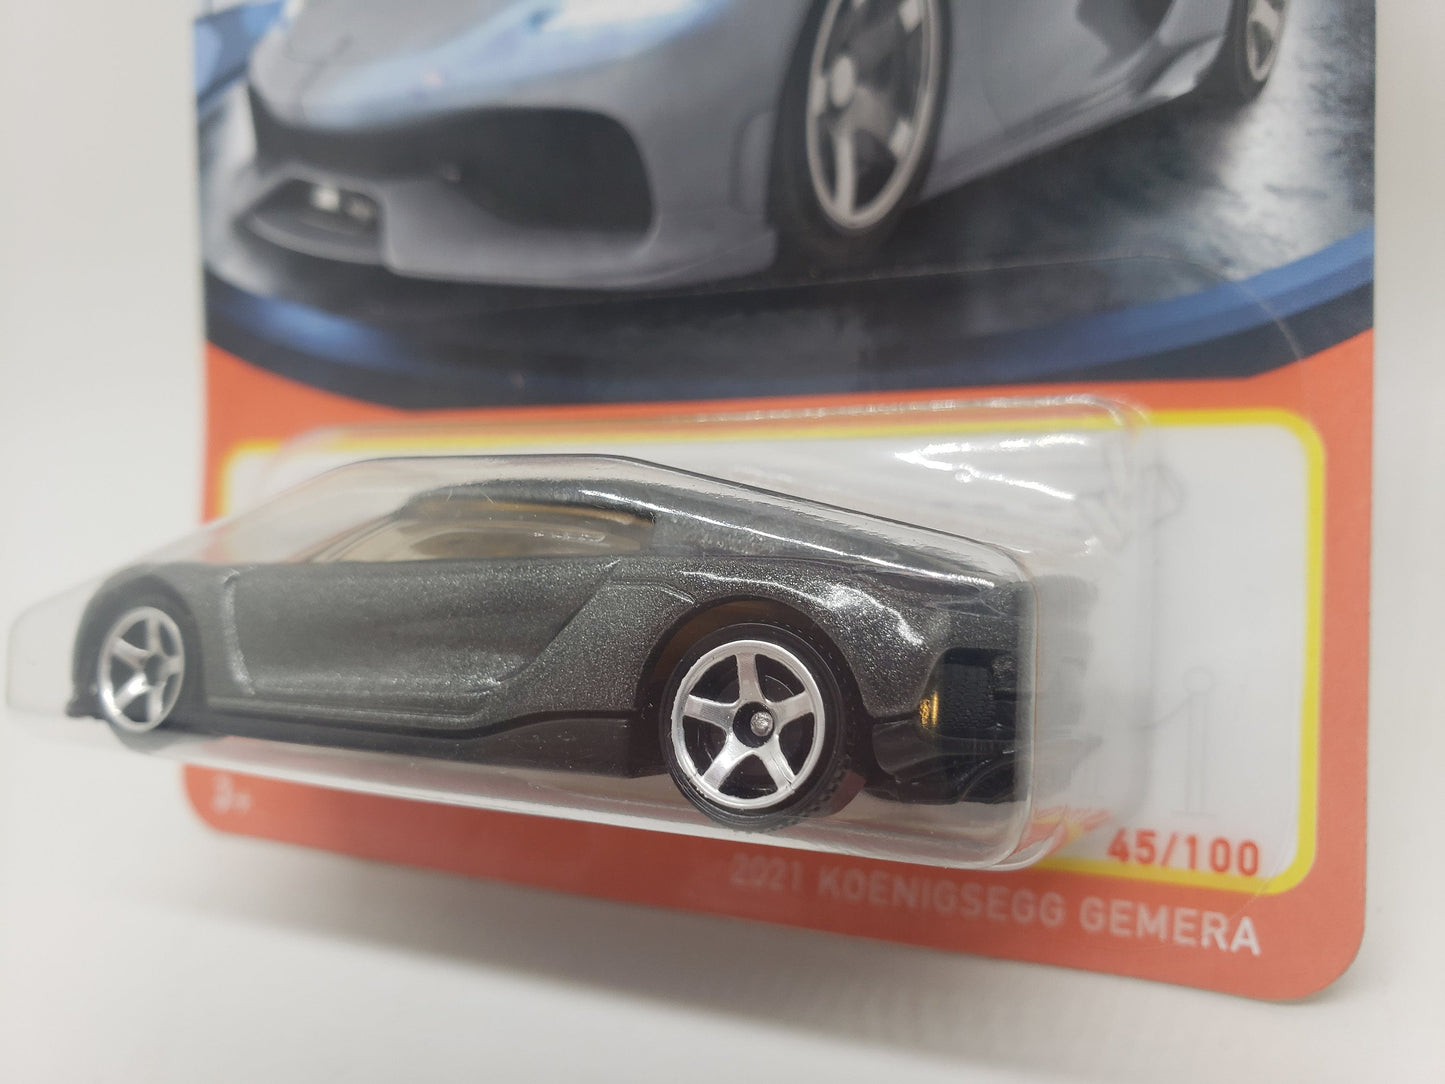 Matchbox Koenigsegg Gemera Gray Collectable Scale Model Miniature Toy Car Perfect Birthday Gift